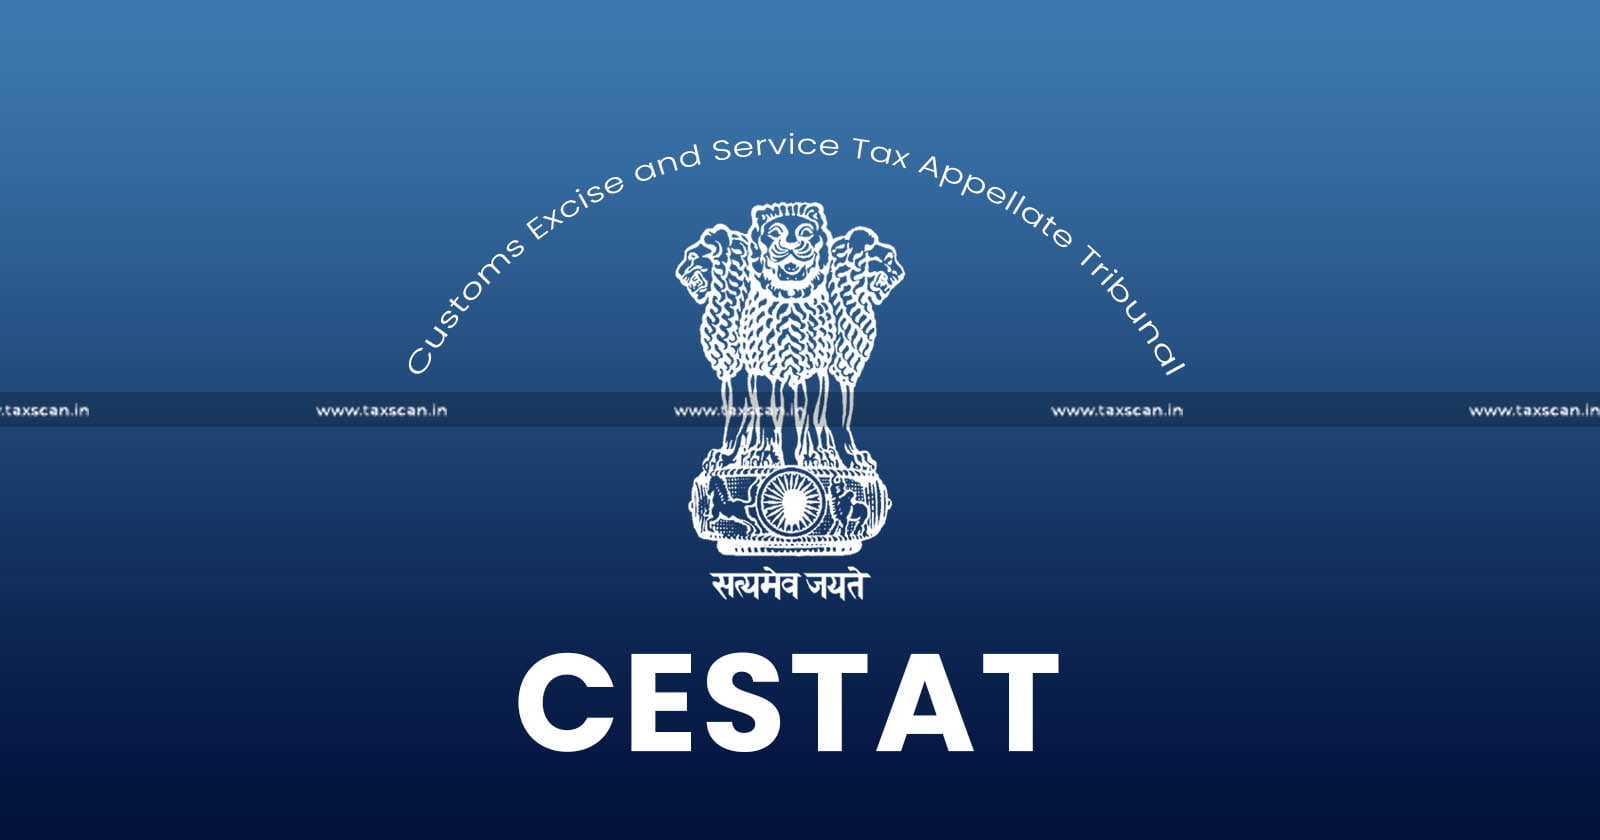 CESTAT - Weekly Round-Up - taxscan